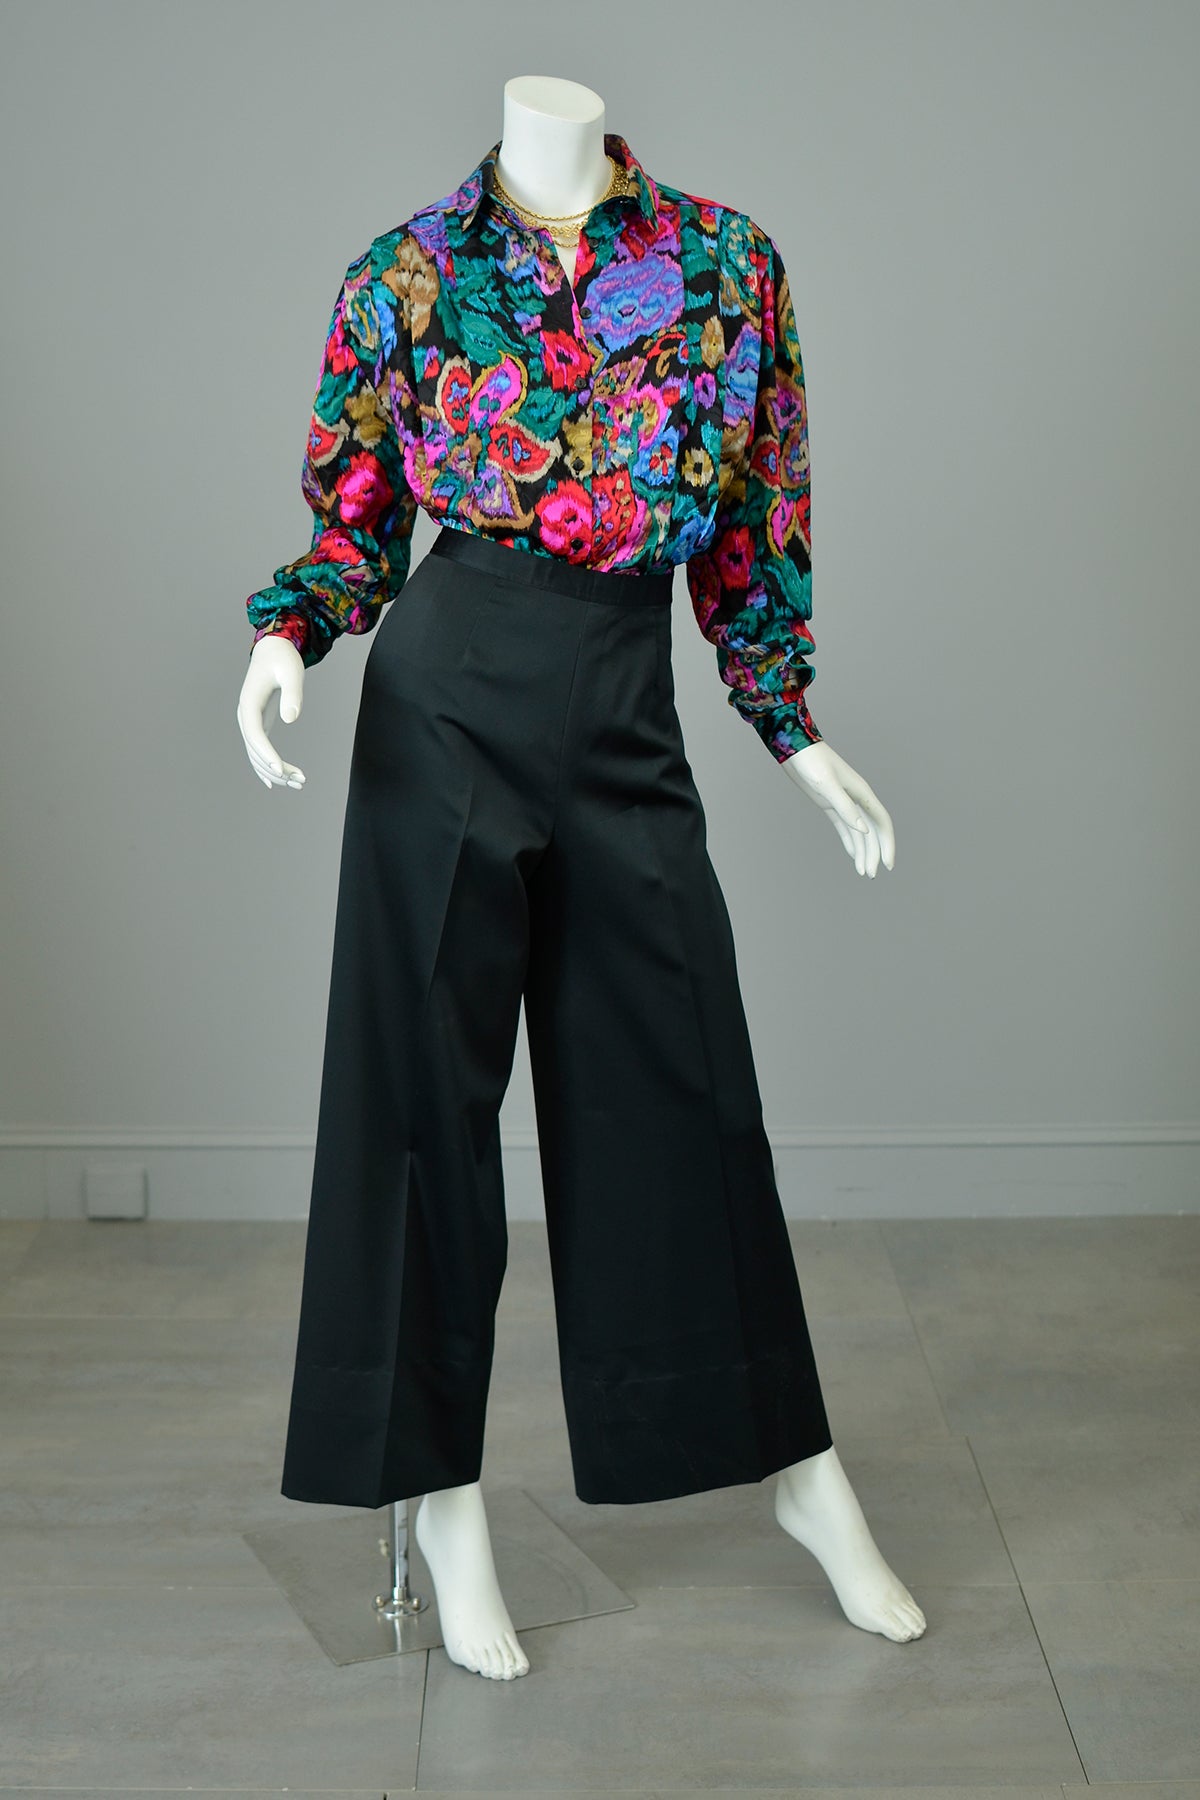 1980s Vibrant Neon Floral Rose Print Silk Blouse with Pleated Shoulders